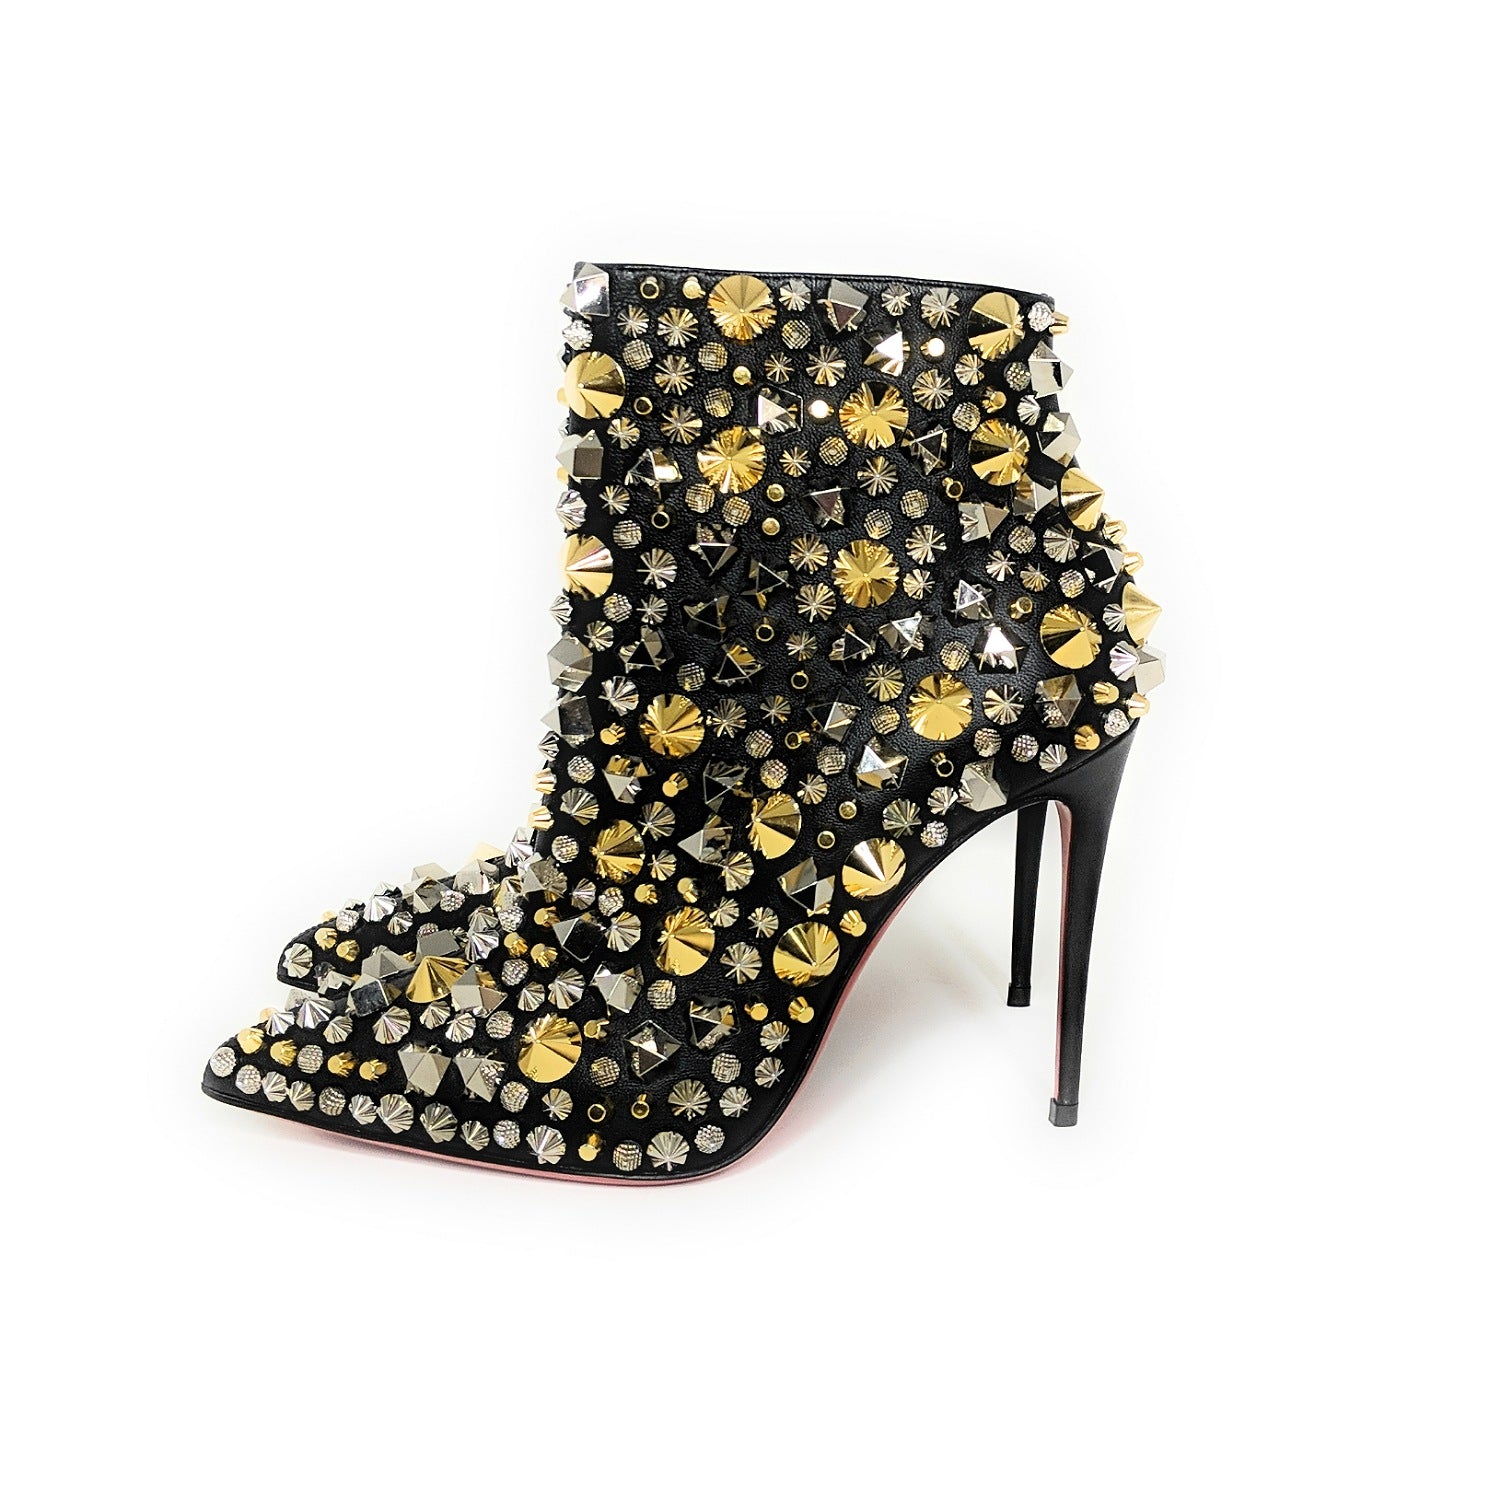 Christian Louboutin - Authenticated Ankle Boots - Velvet Black for Women, Never Worn